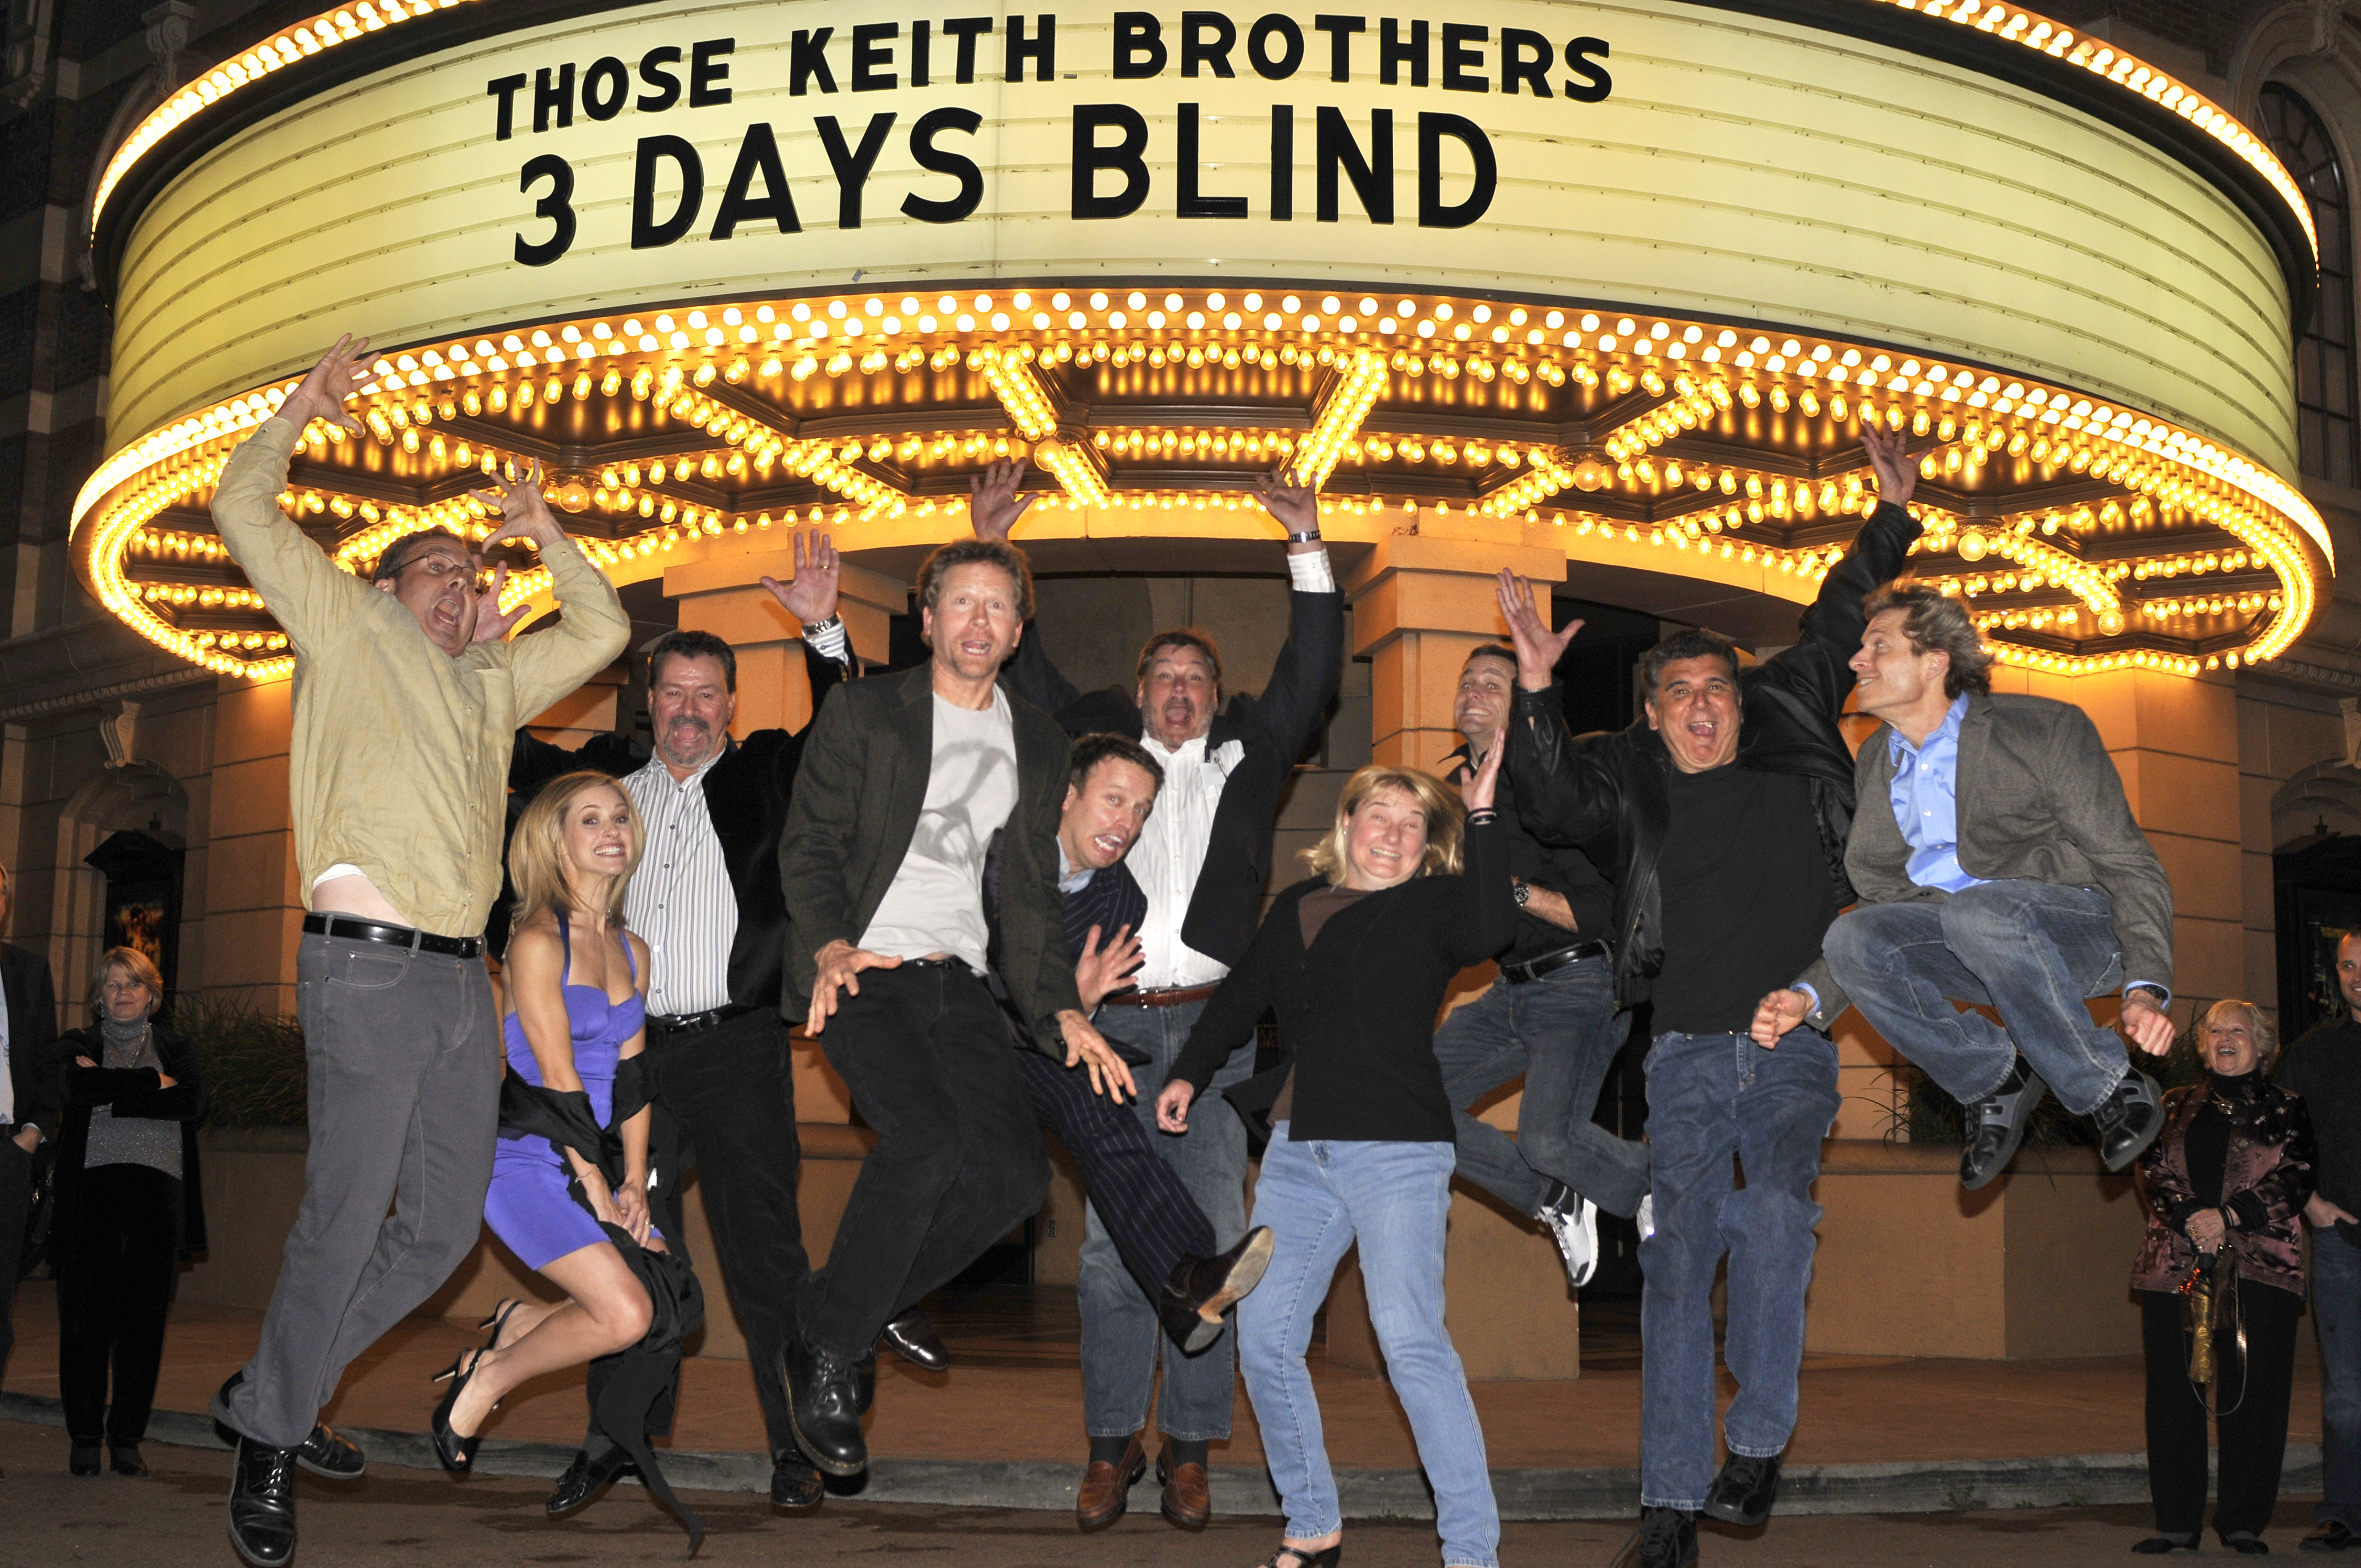 Producers and Cast of 3 Days Blind. Warner Brothers, 2009.